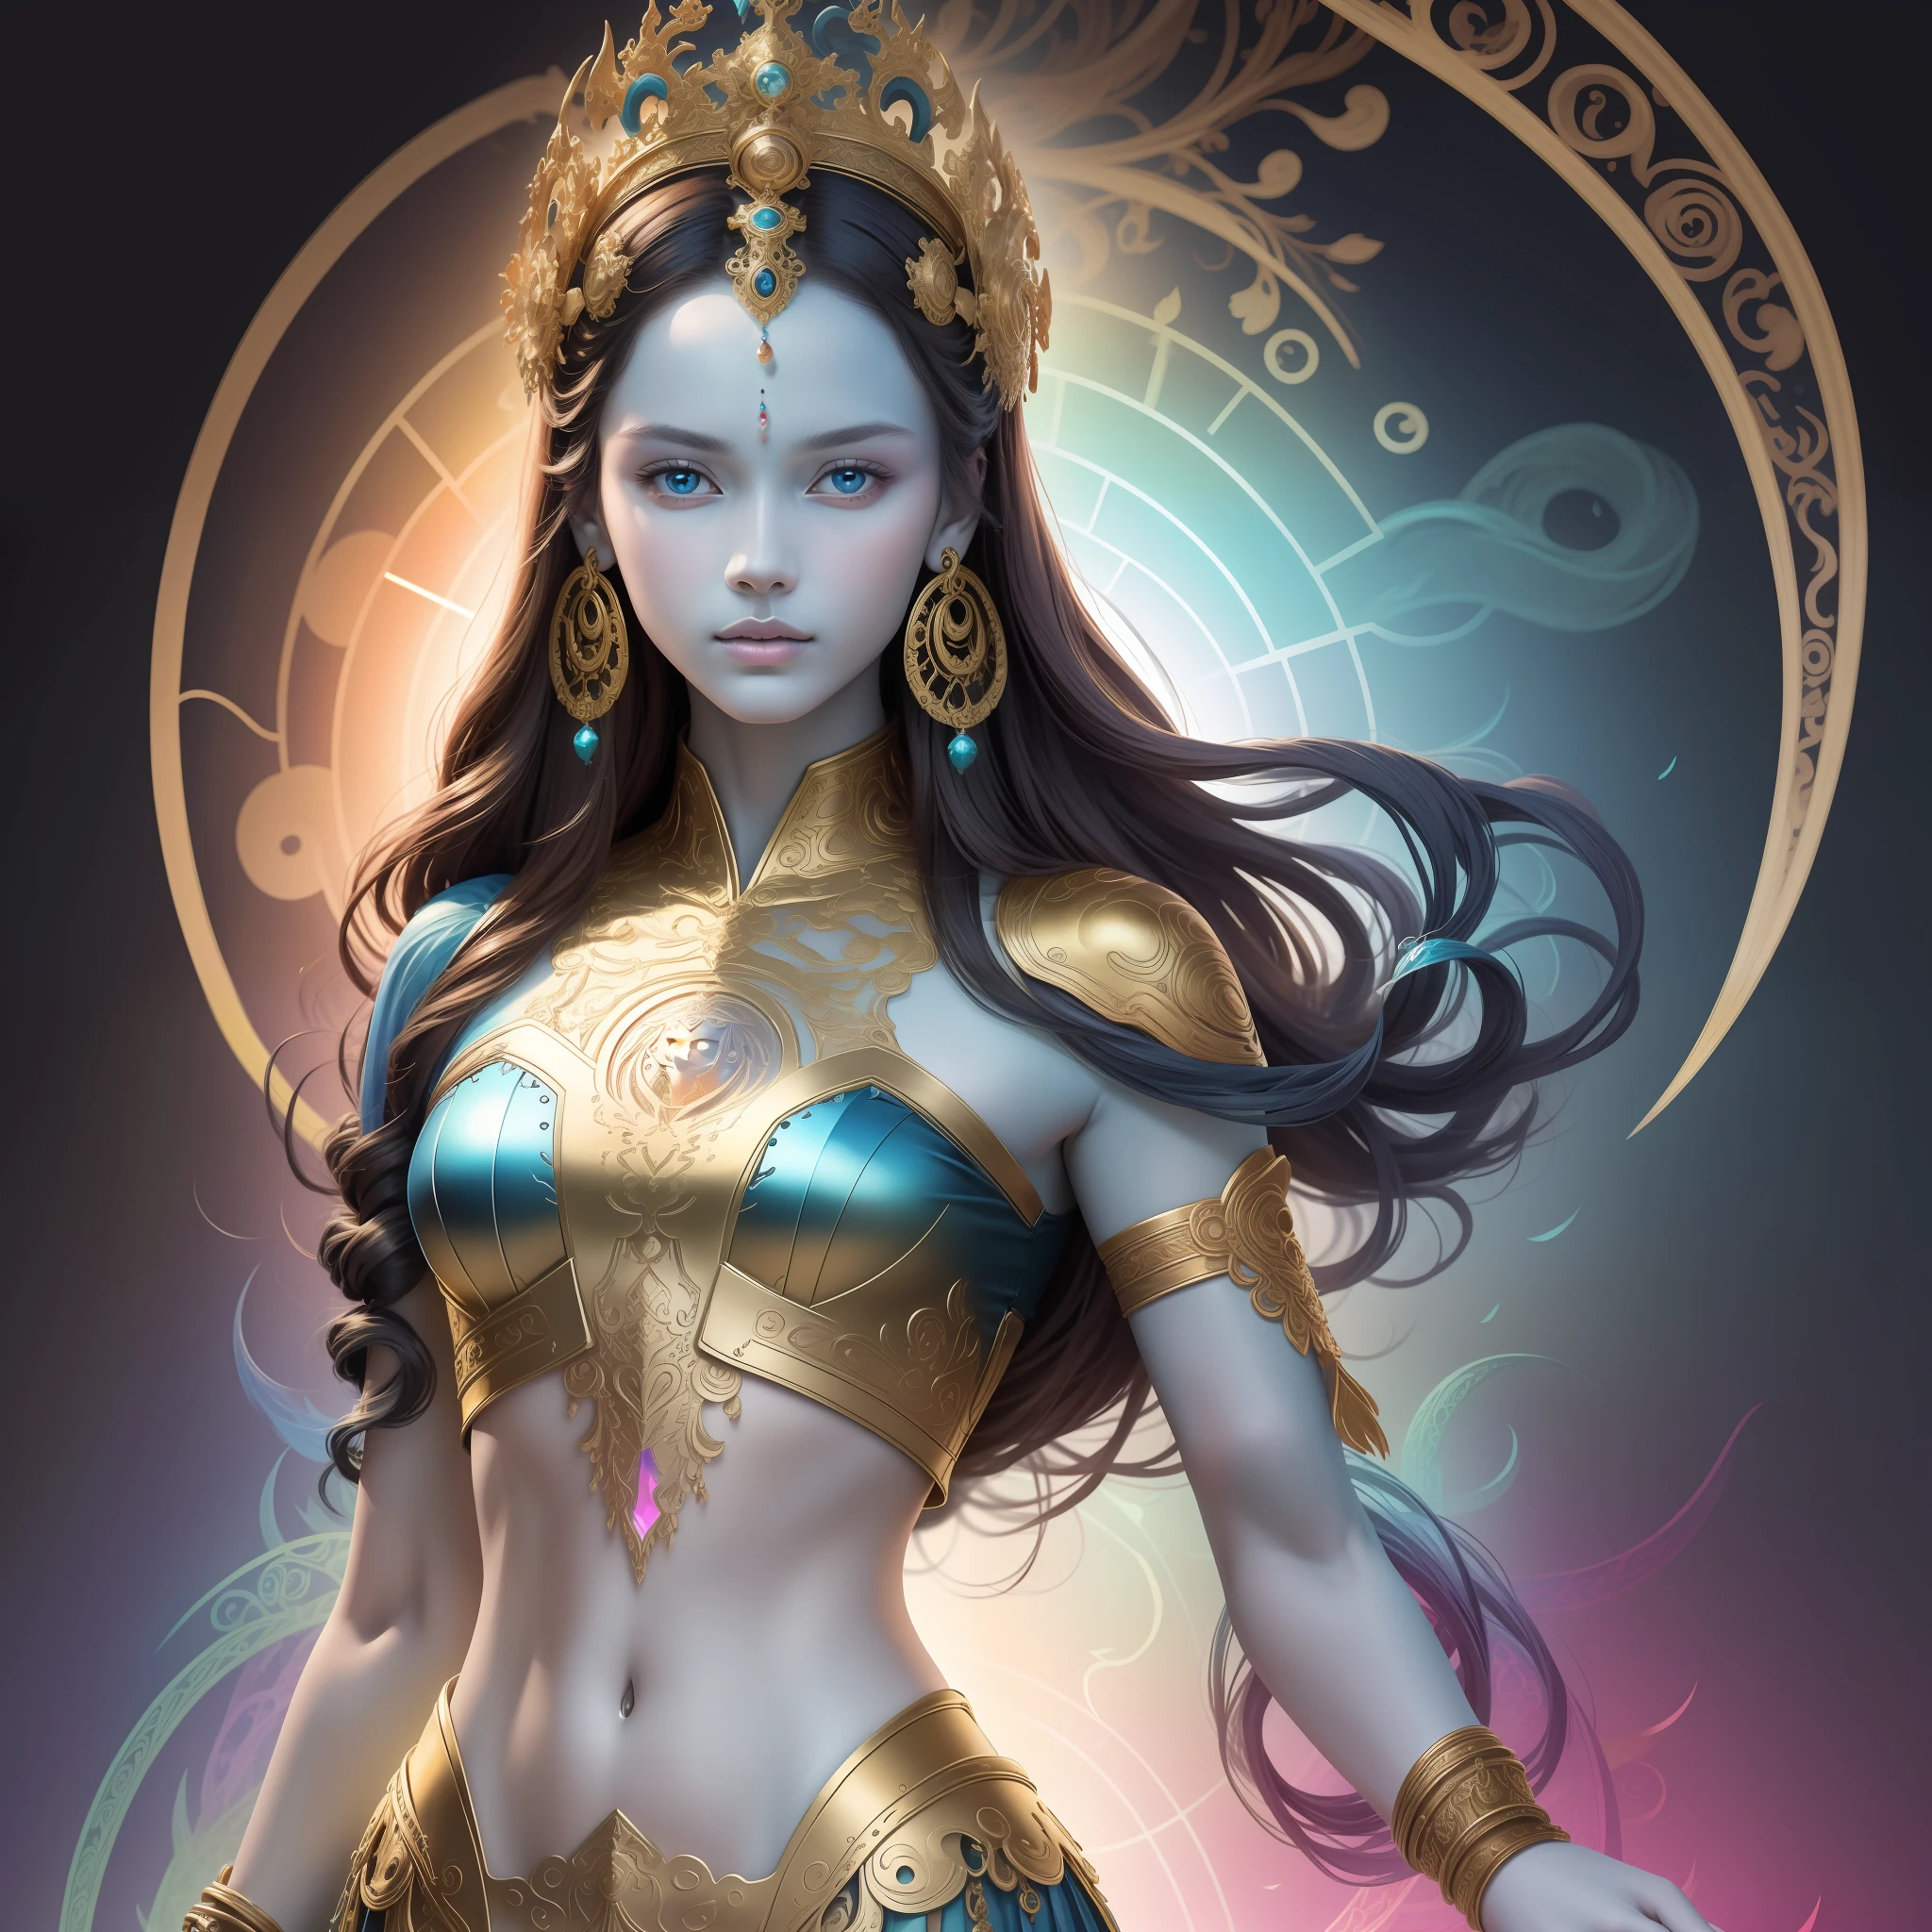 (Masterpiece, Top Quality, Best Quality, Official Art, Beauty and Aesthetics: 1.2), (1girl: 1.3), (Blue Skin), Very Detailed, (Fractal Art: 1.2), Colorful, Most Detailed, (Zentangle: 1.2), (Dynamic Pose), (Abstract Background: 1.5), (Traditional Clothing: 1.2), (Shiny Skin), (Multiple Colors: 1.4),